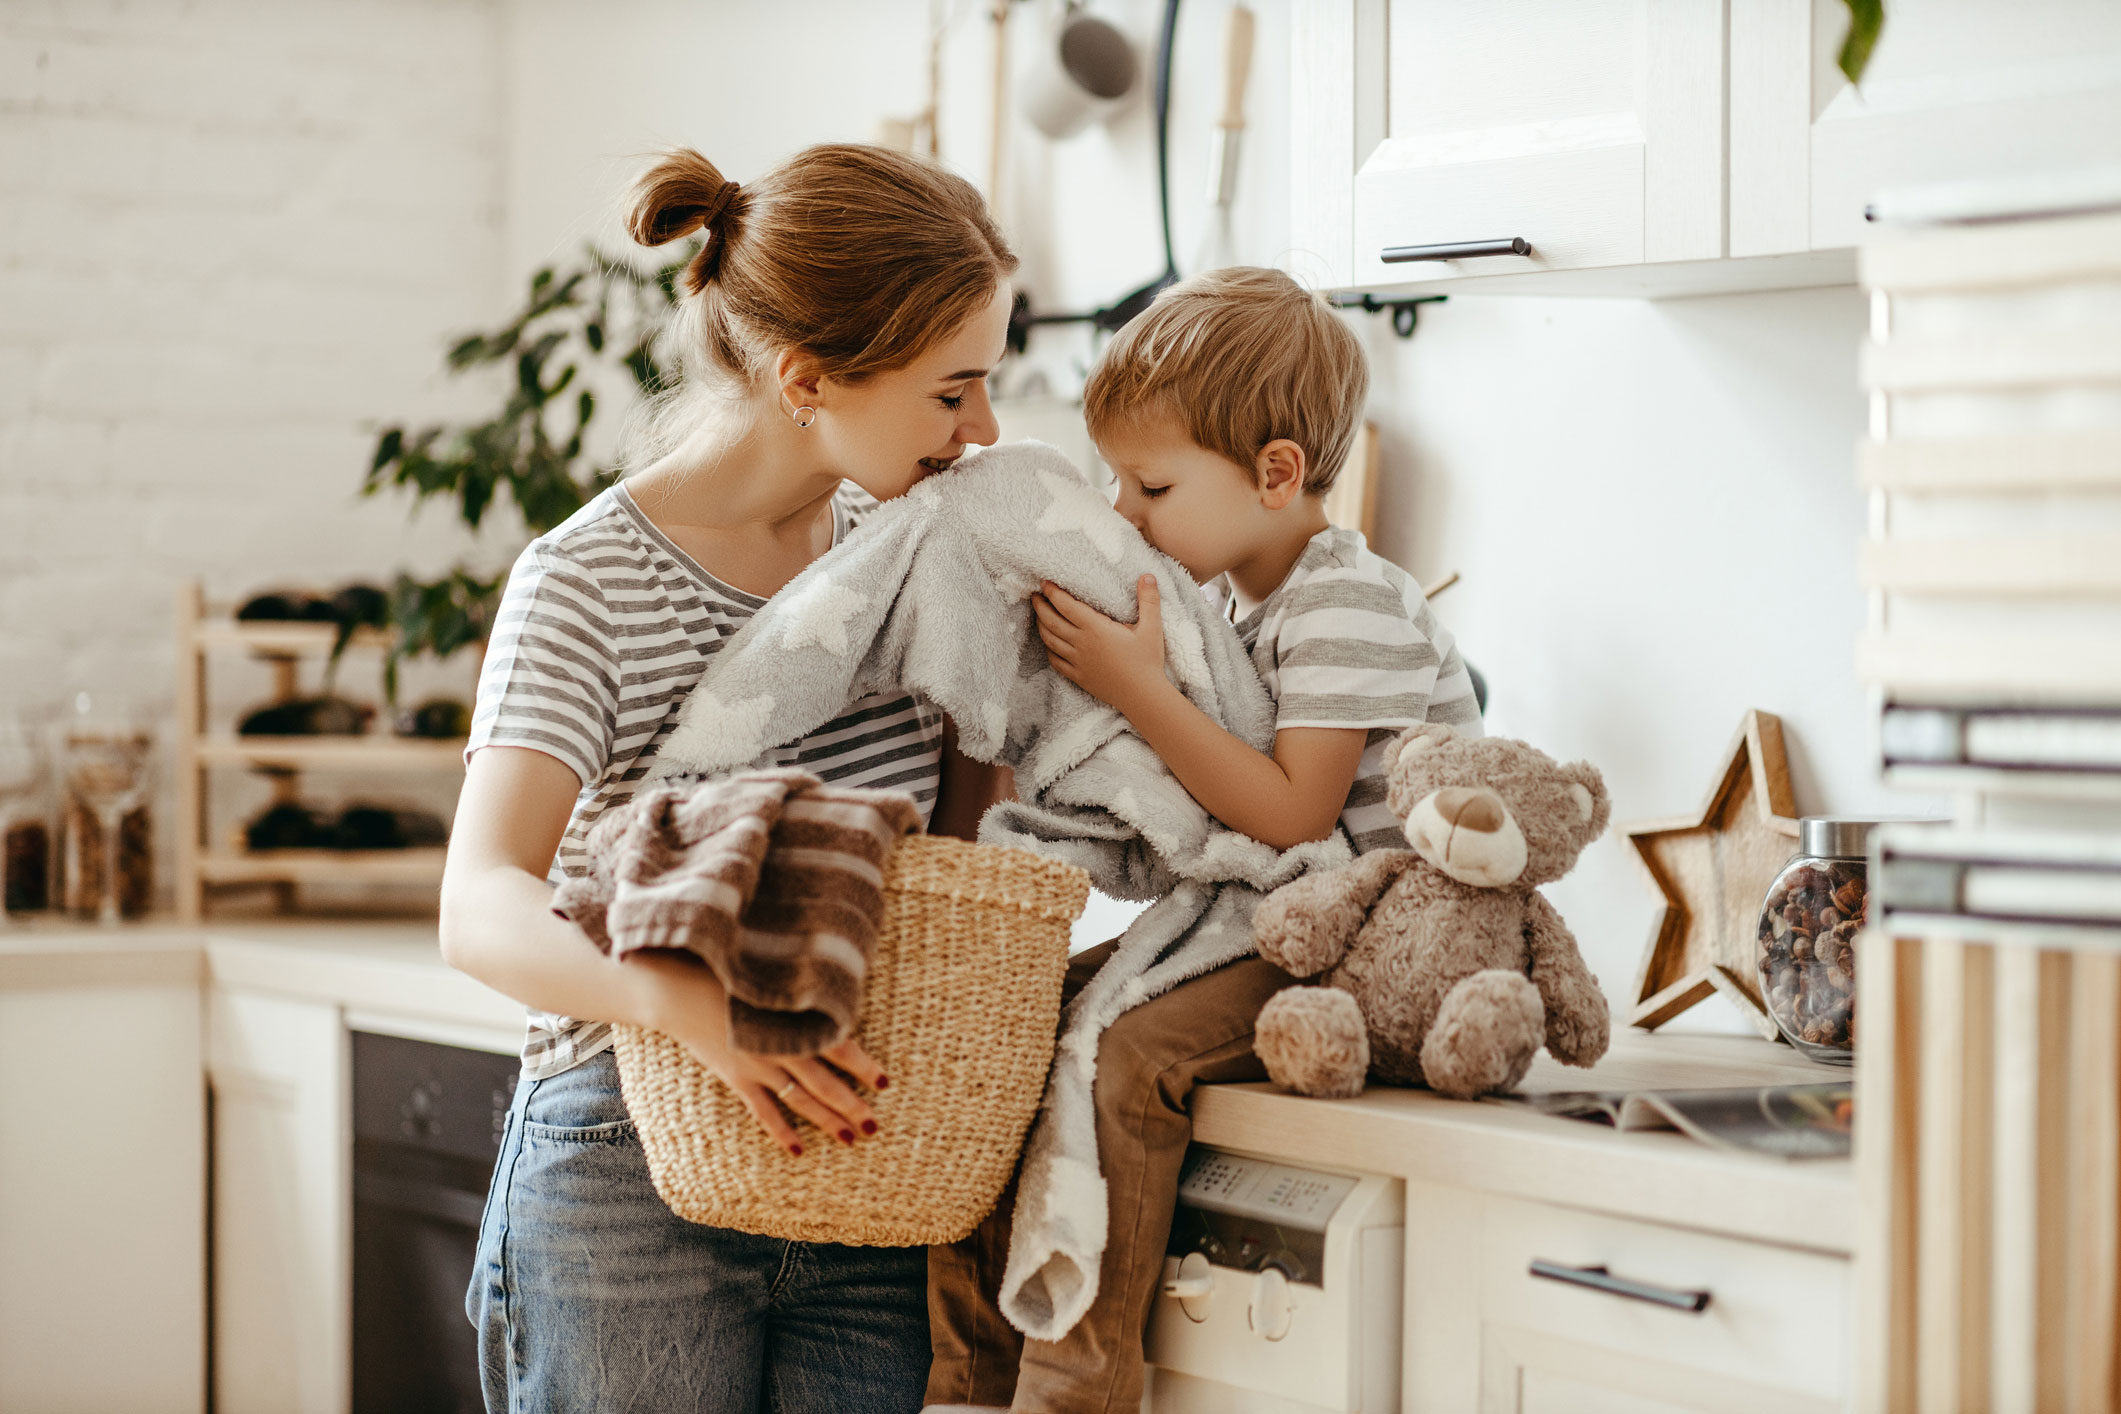 mother holding a laundry basket with young son and stuffed animal